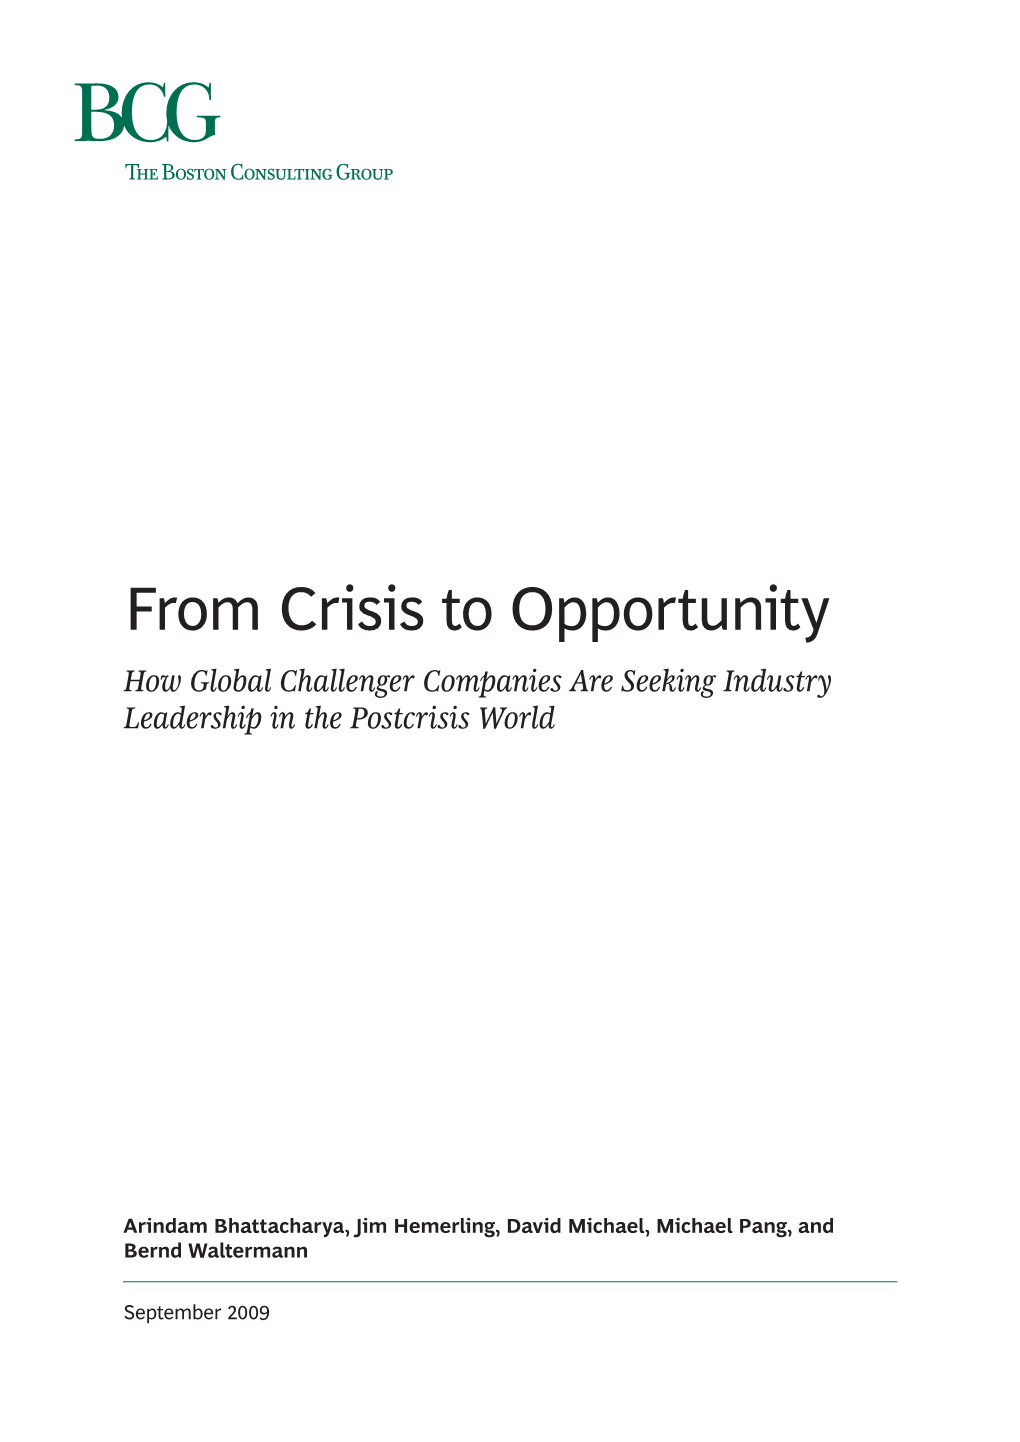 How Global Challenger Companies Are Seeking Industry Leadership in the Postcrisis World